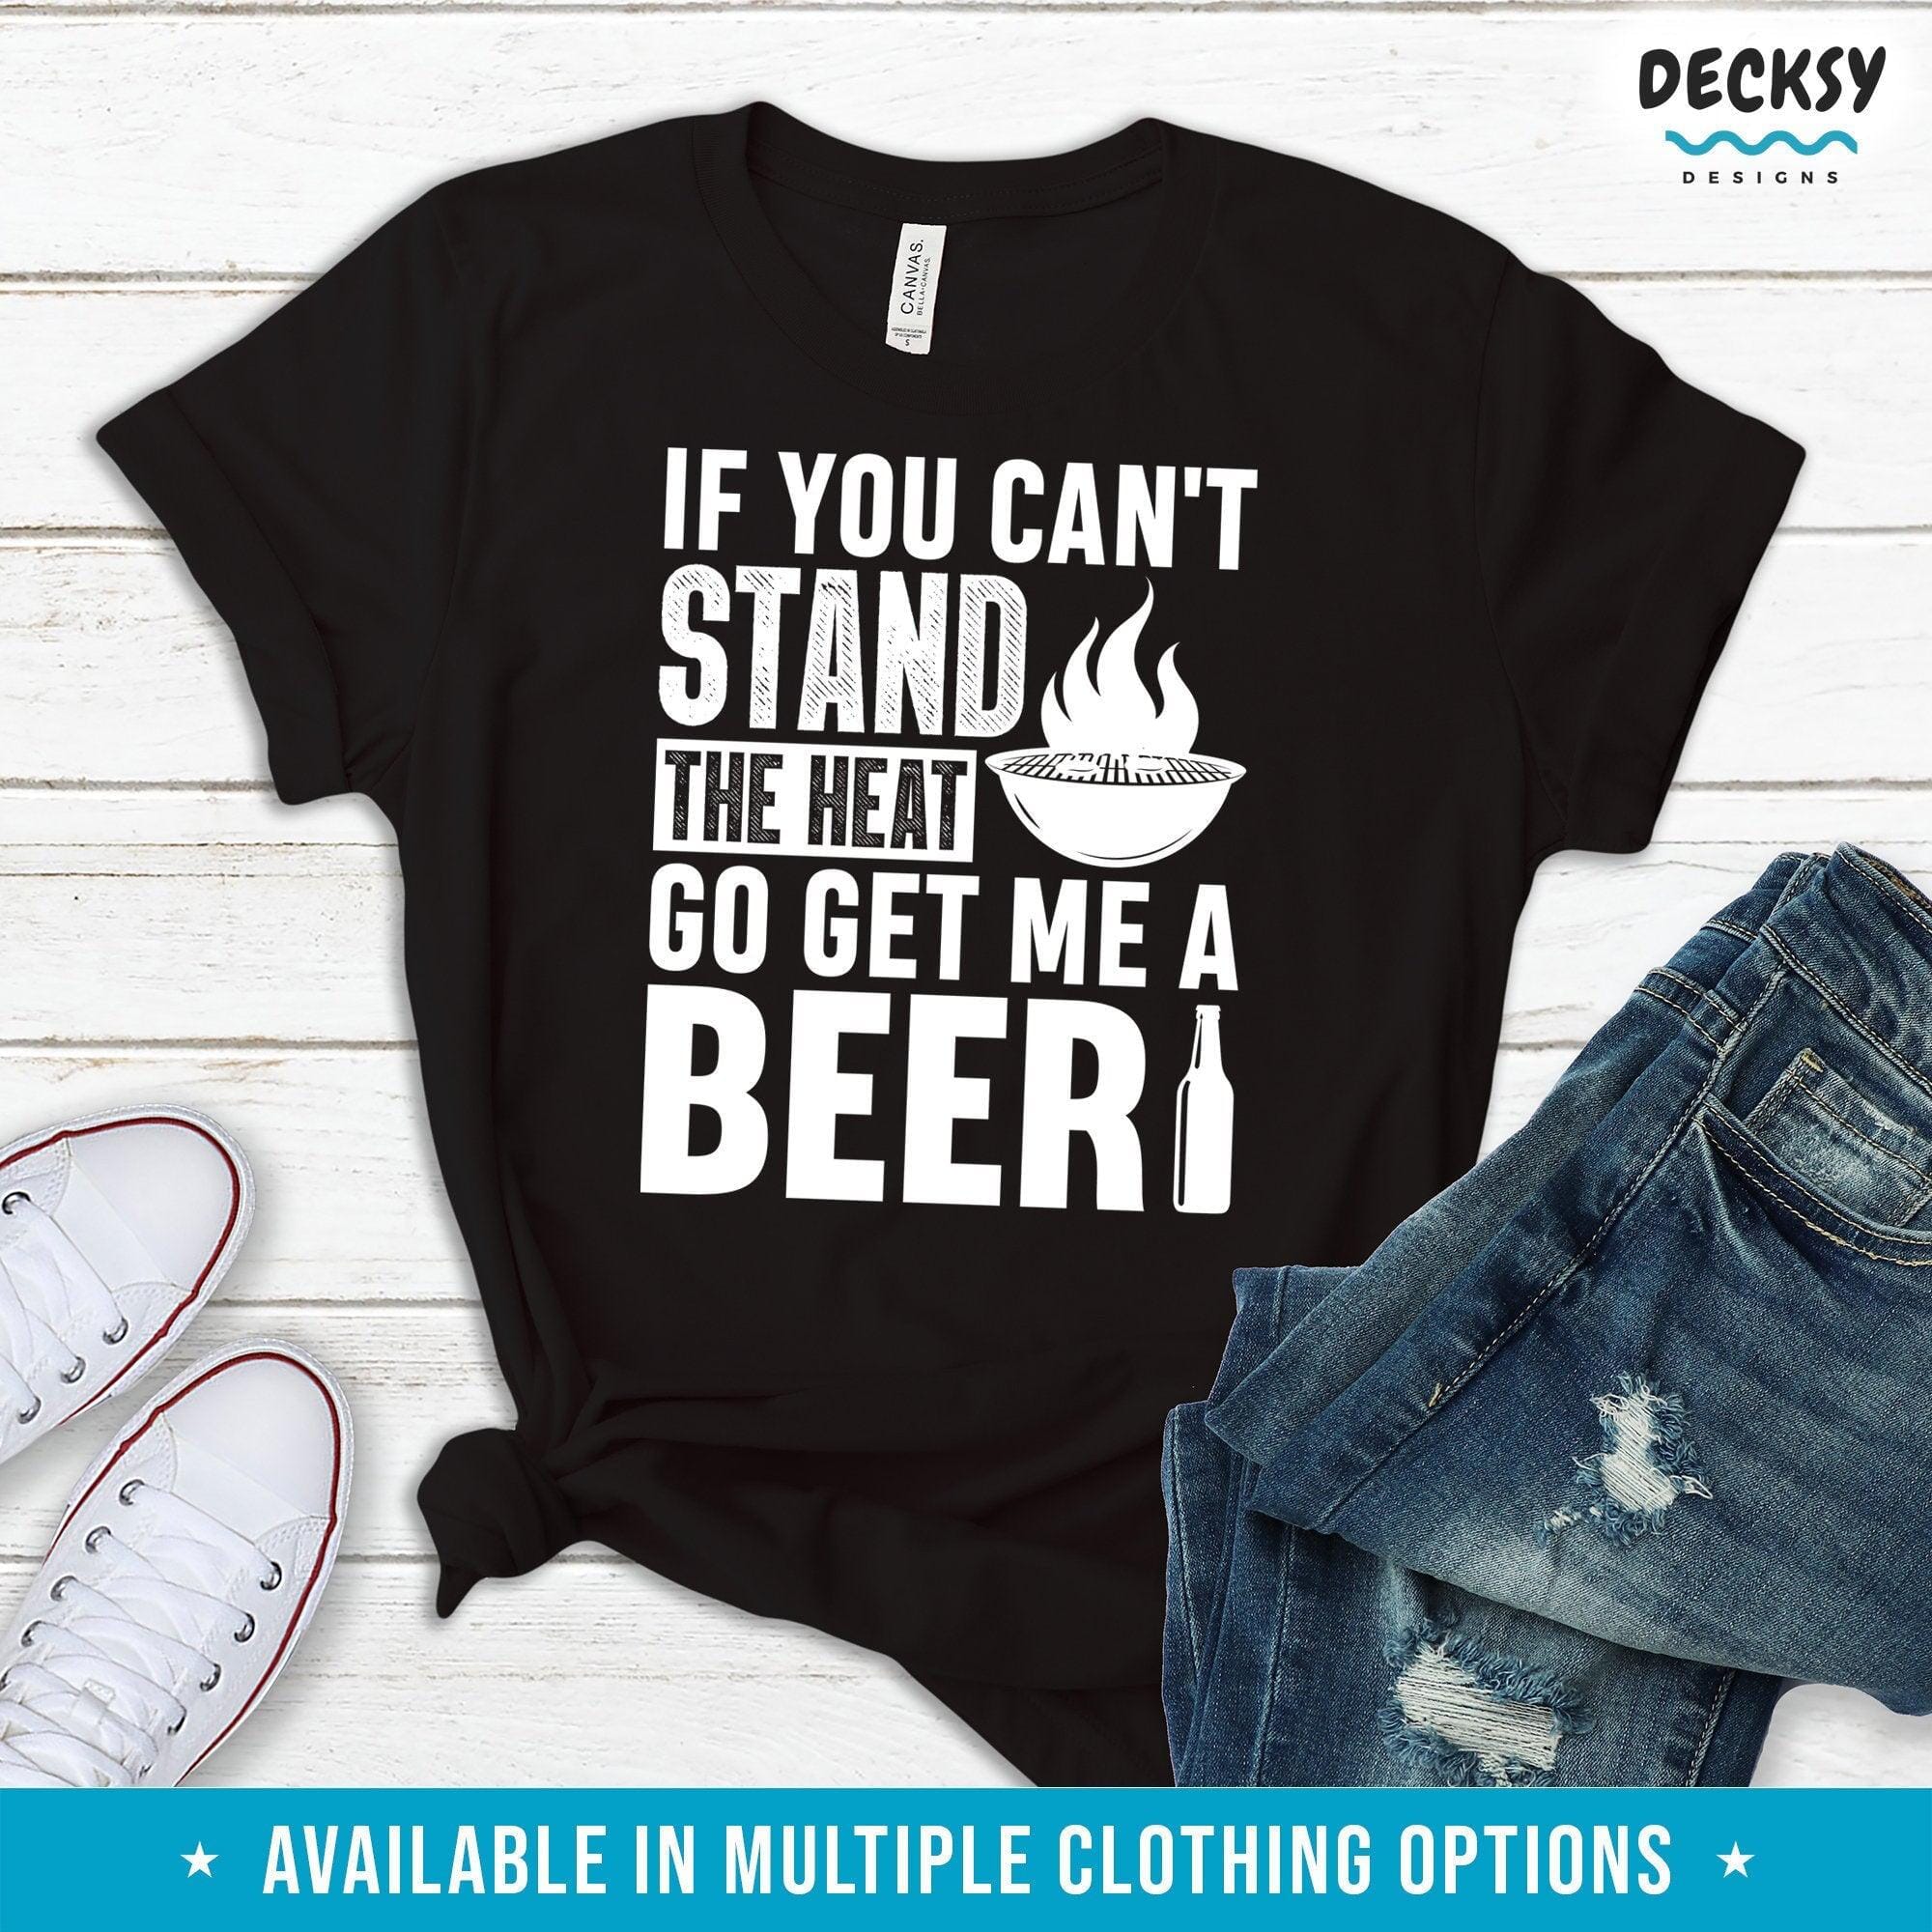 Bbq Beer Shirt, Outdoor Barbecue Gift-Clothing:Gender-Neutral Adult Clothing:Tops & Tees:T-shirts:Graphic Tees-DecksyDesigns